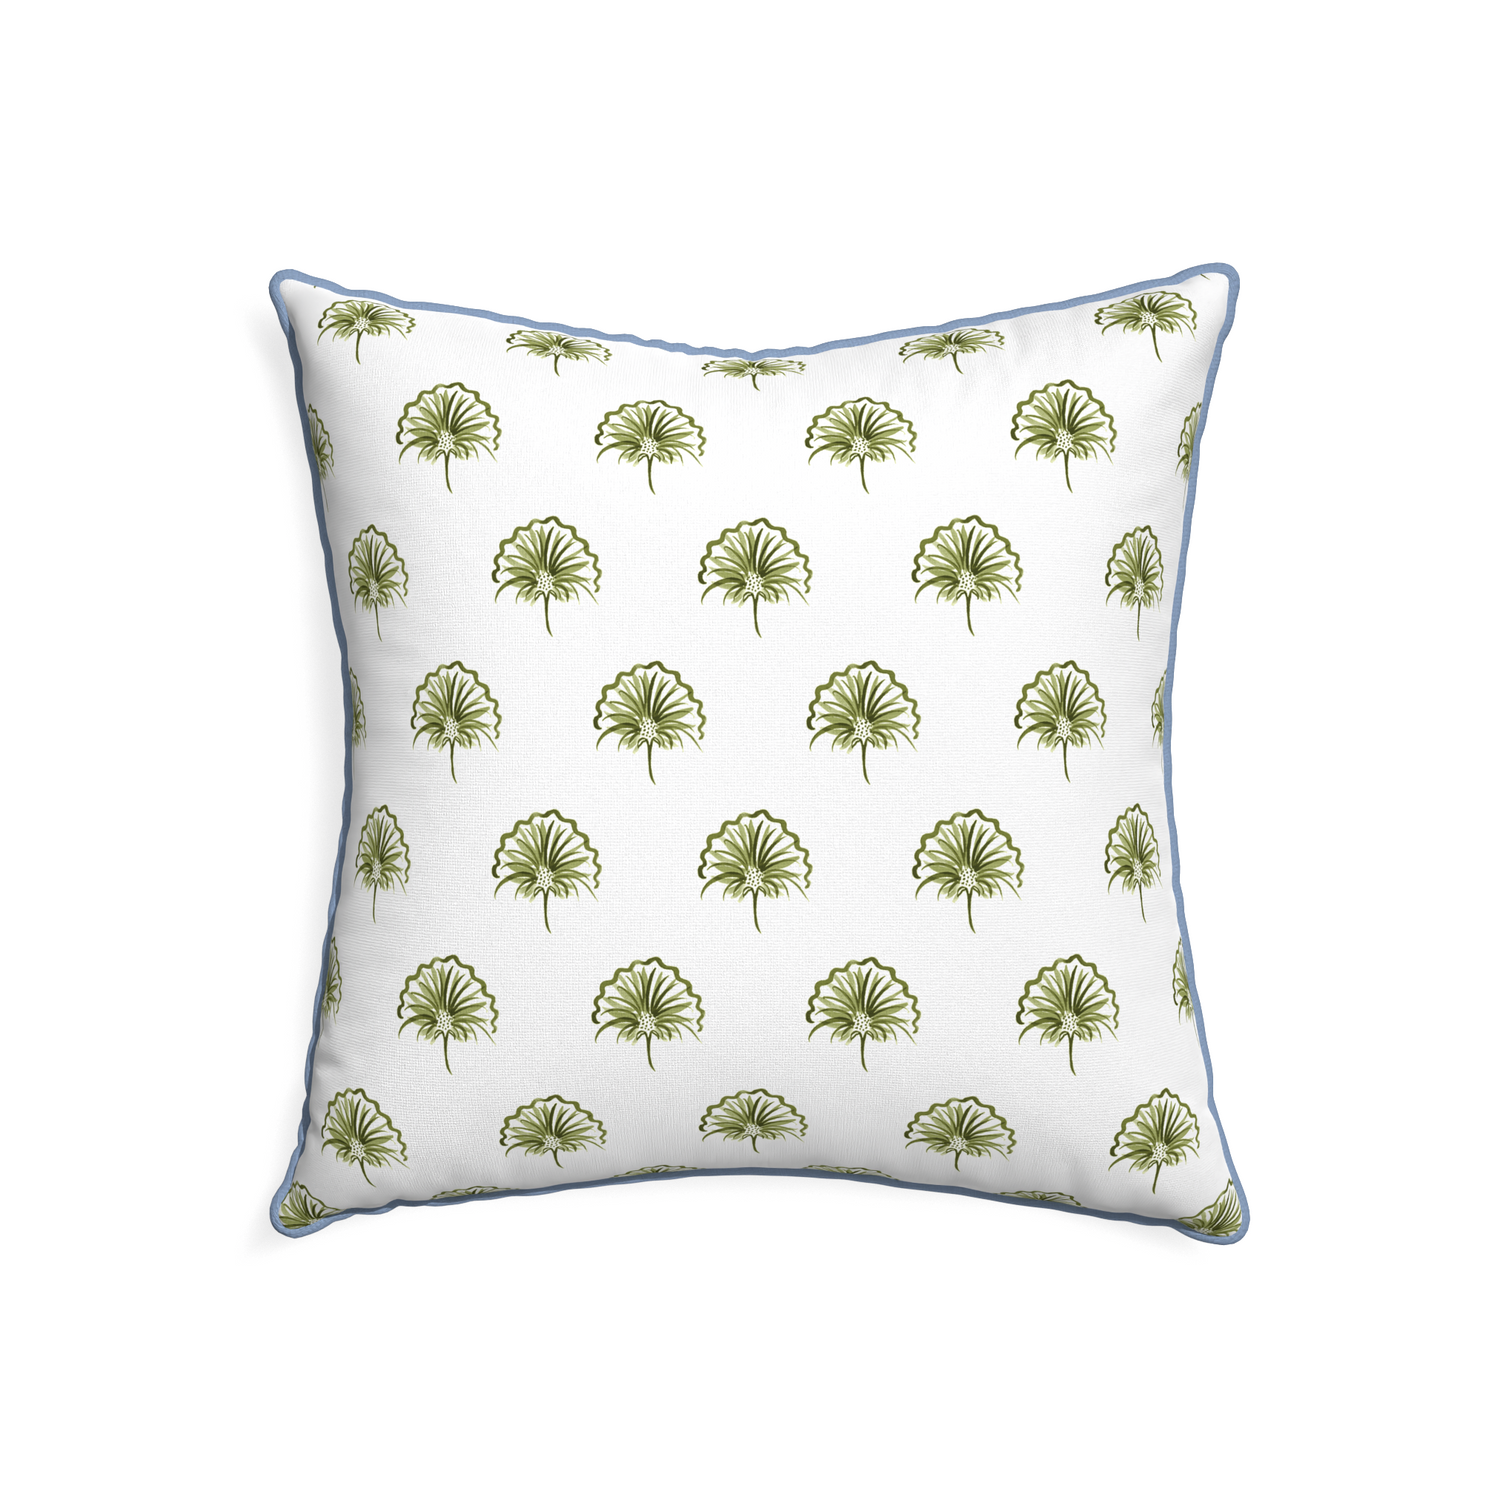 22-square penelope moss custom green floralpillow with sky piping on white background